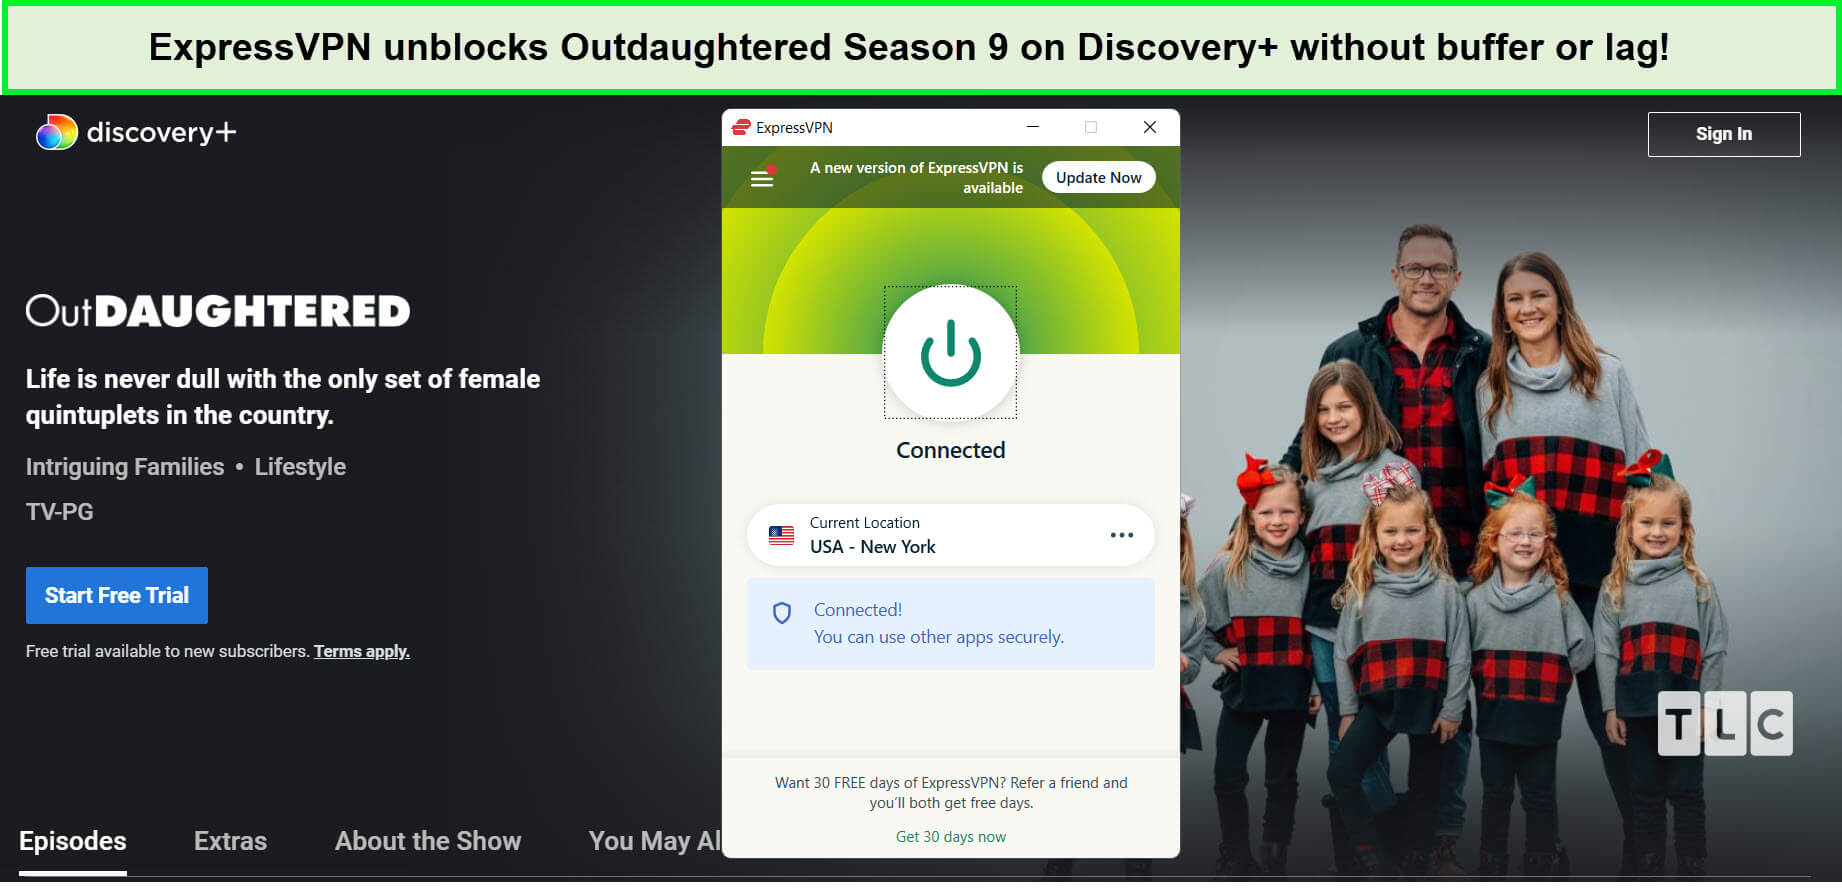 expressvpn-unblocks-outdaughtered-season-nine-on-discovery-plus-in-Germany